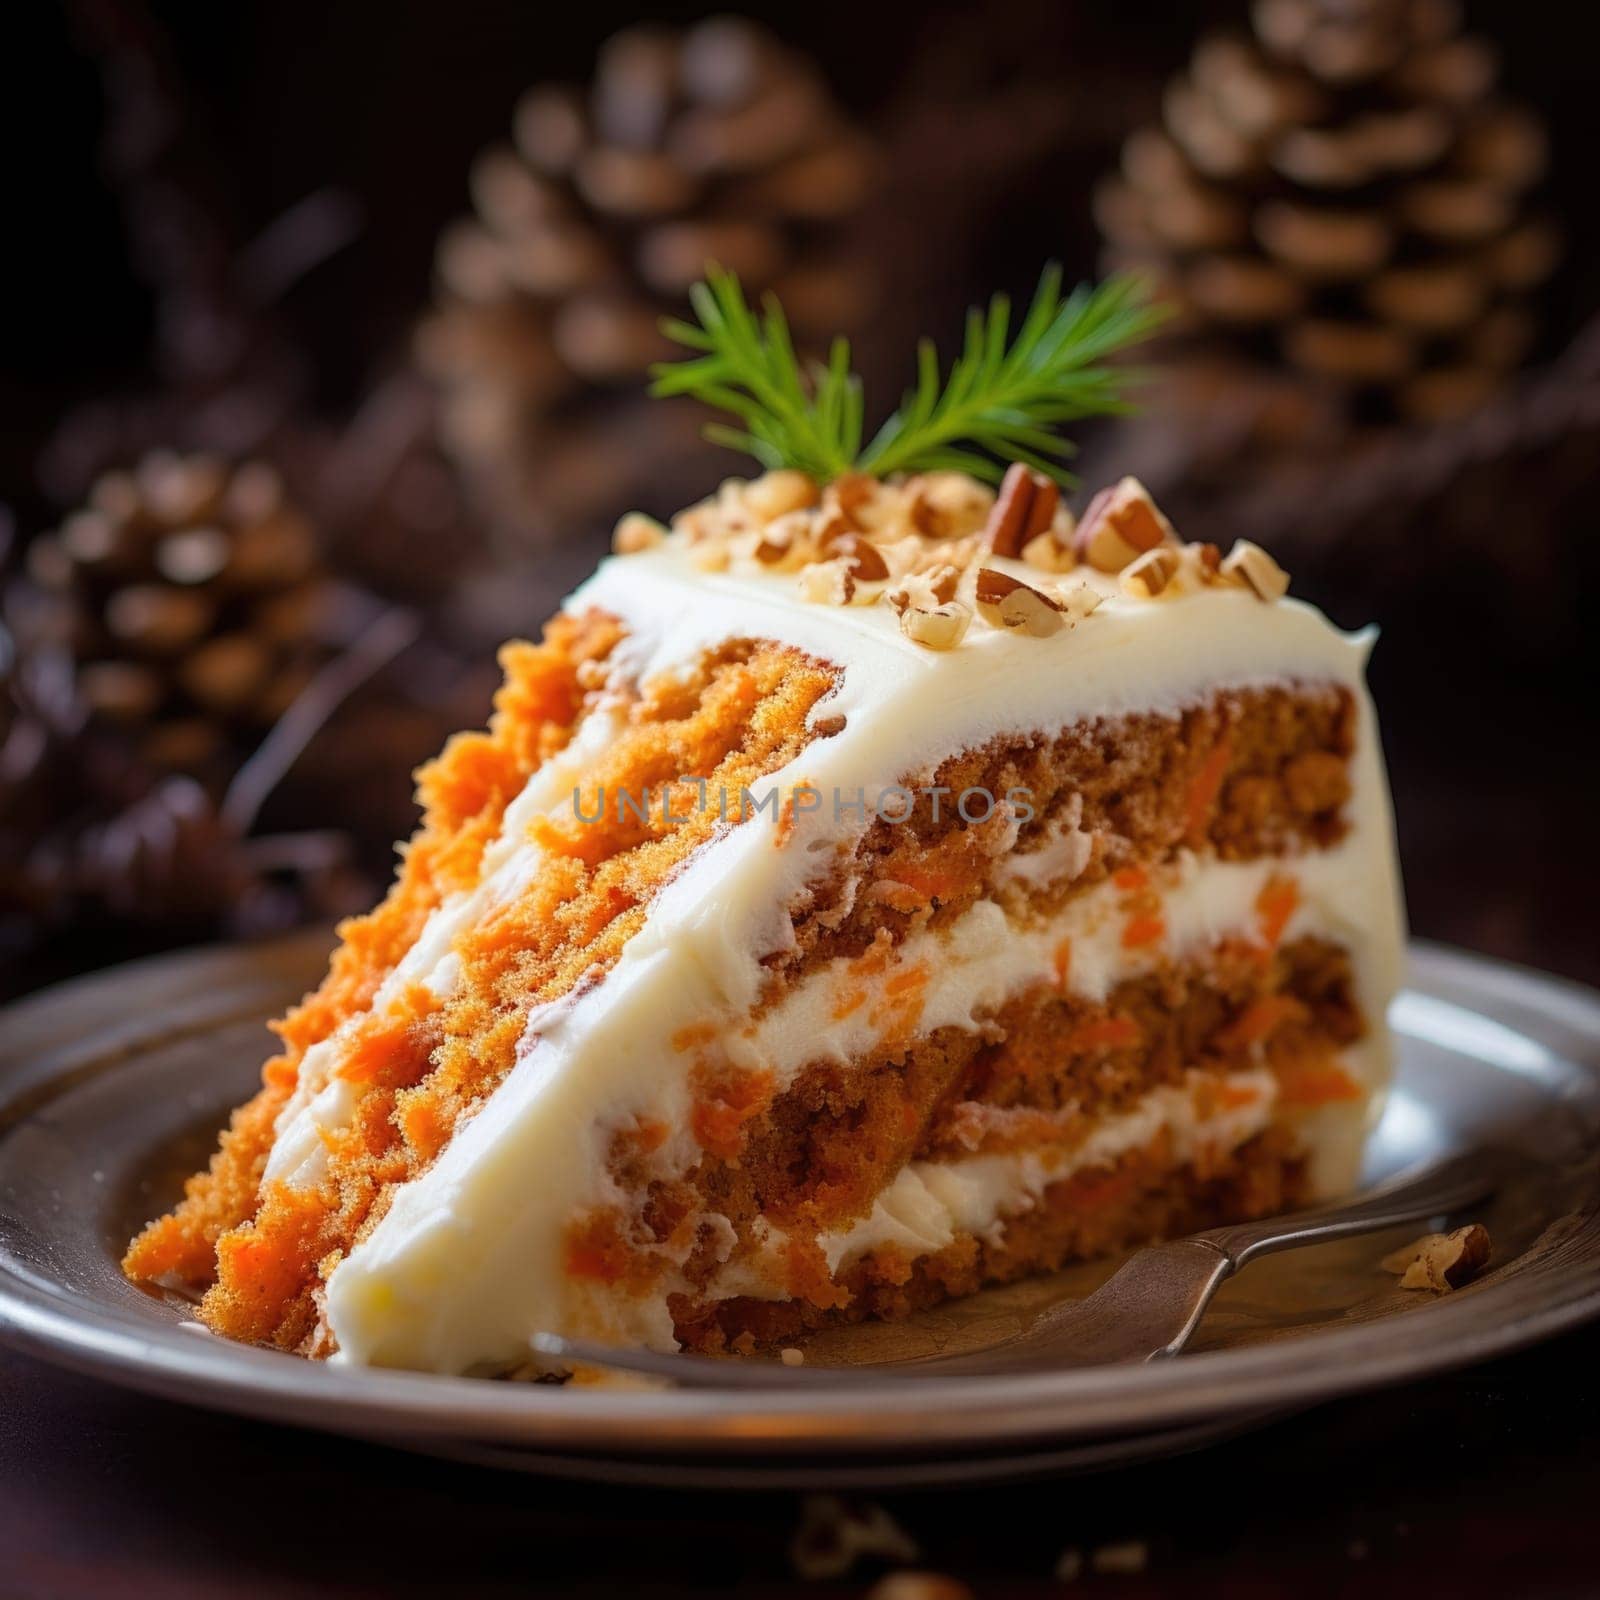 A slice of carrot cake with cream cheese frosting and pine cones, AI by starush